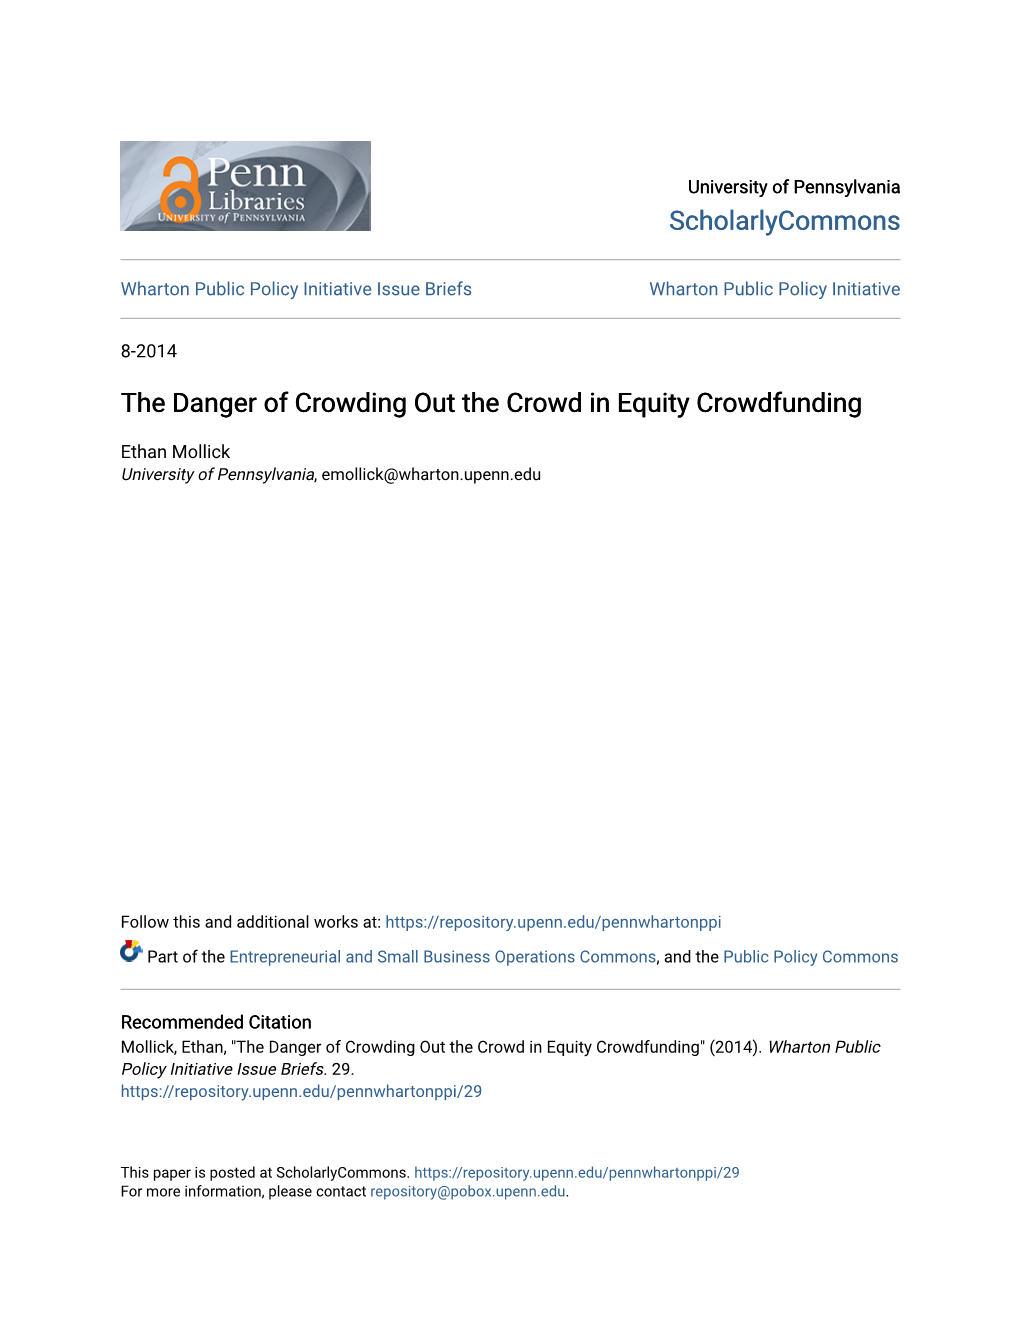 The Danger of Crowding out the Crowd in Equity Crowdfunding